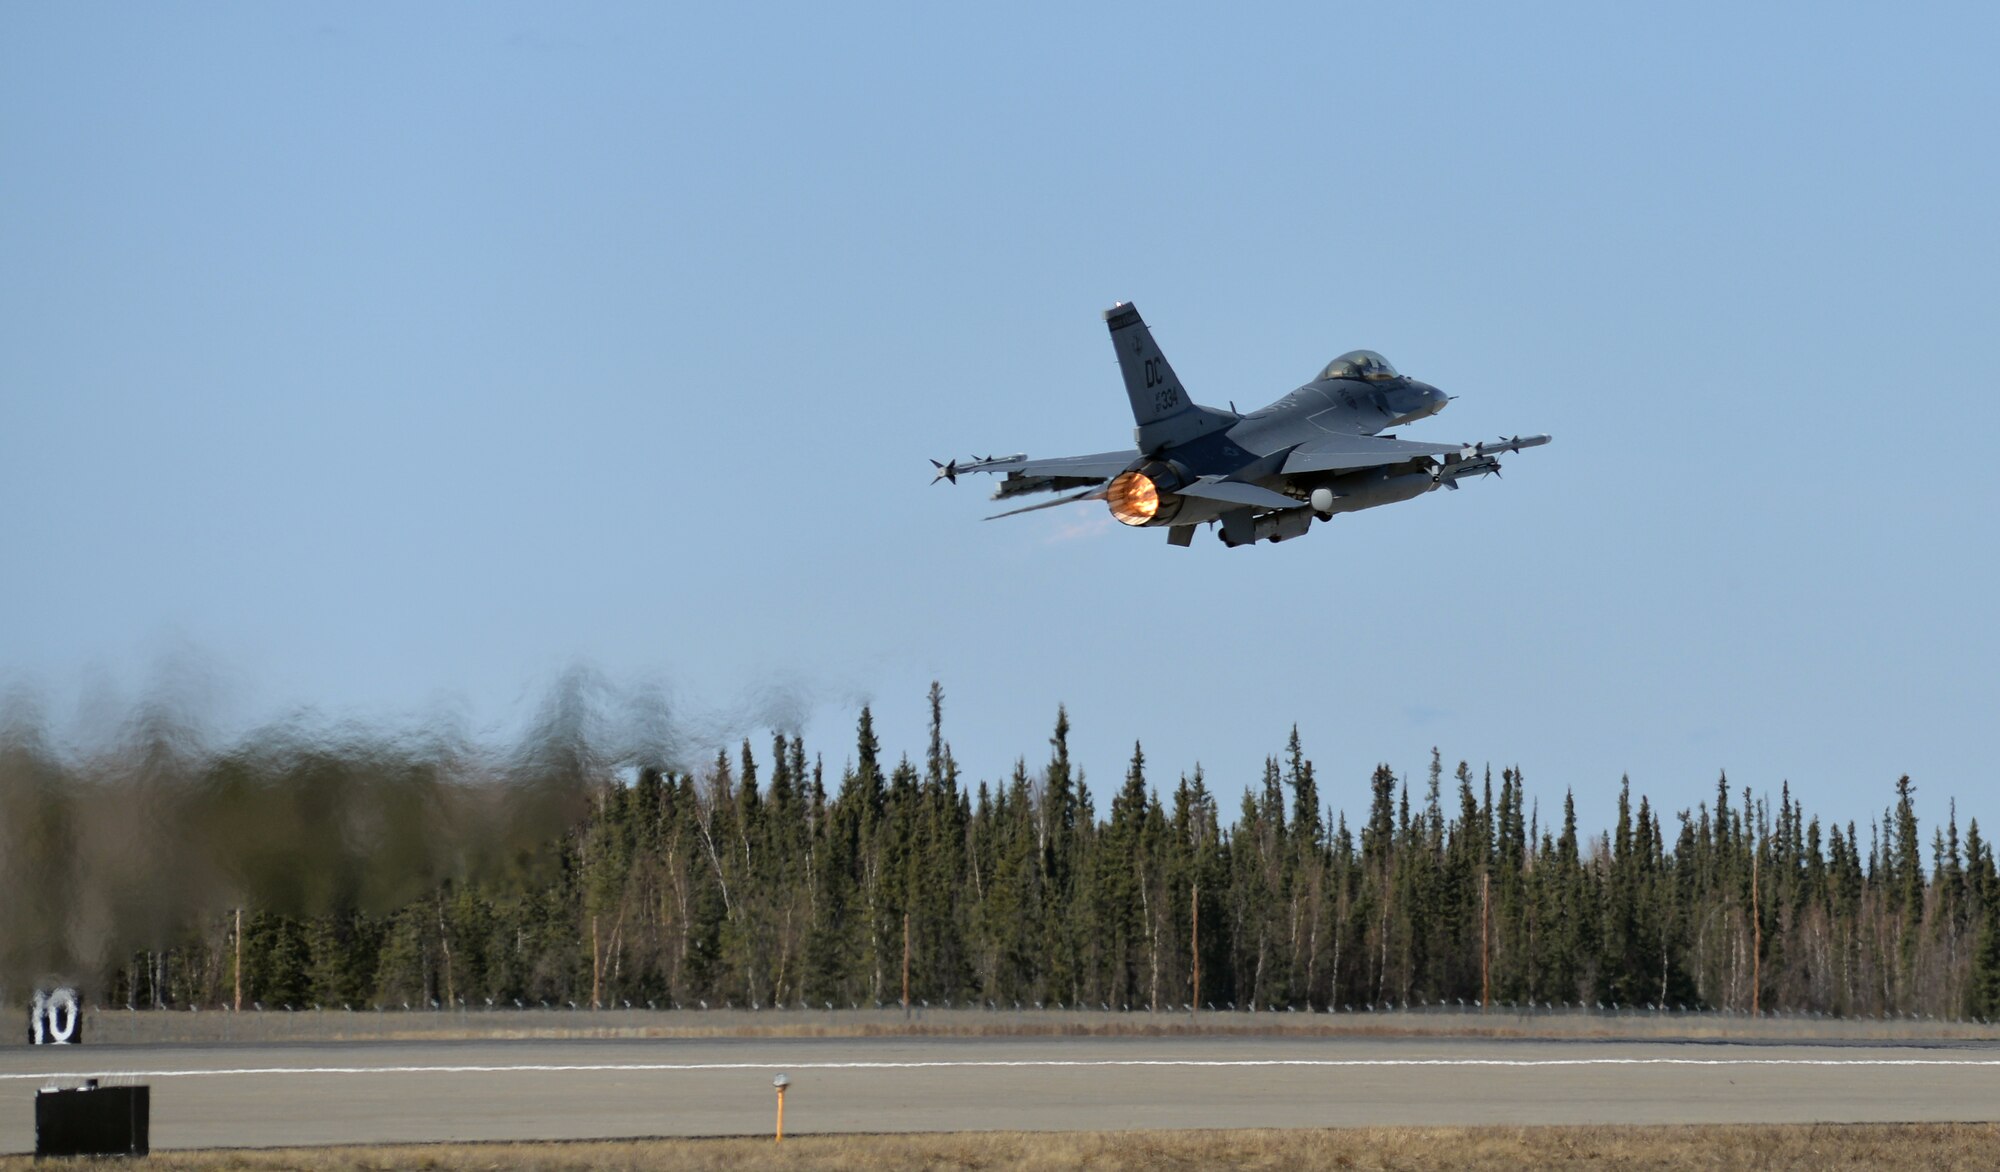 A U.S. Air Force F-16 Fighting Falcon aircraft assigned to the 113th Wing, District of Columbia Air National Guard, takes off from Eielson Air Force Base, Alaska, April 27, 2015, to participate in a Distant Frontier mission with F-16 pilots and aircraft assigned to Eielson's 18th Aggressor Squadron. Distant Frontier provided the deployed pilots an opportunity to fly orientation flights in the more than 67,000 square-mile Joint Pacific Alaska Range Complex, become familiar with local flying restrictions, receive local safety and survival briefings, and develop orientation plans during the week prior to RED FLAG-Alaska 15-2, a Pacific Air Forces-directed field training exercise flown under simulated air combat conditions to increases combat capability. (U.S. Air Force photo by Master Sgt. Karen J. Tomasik/Released)